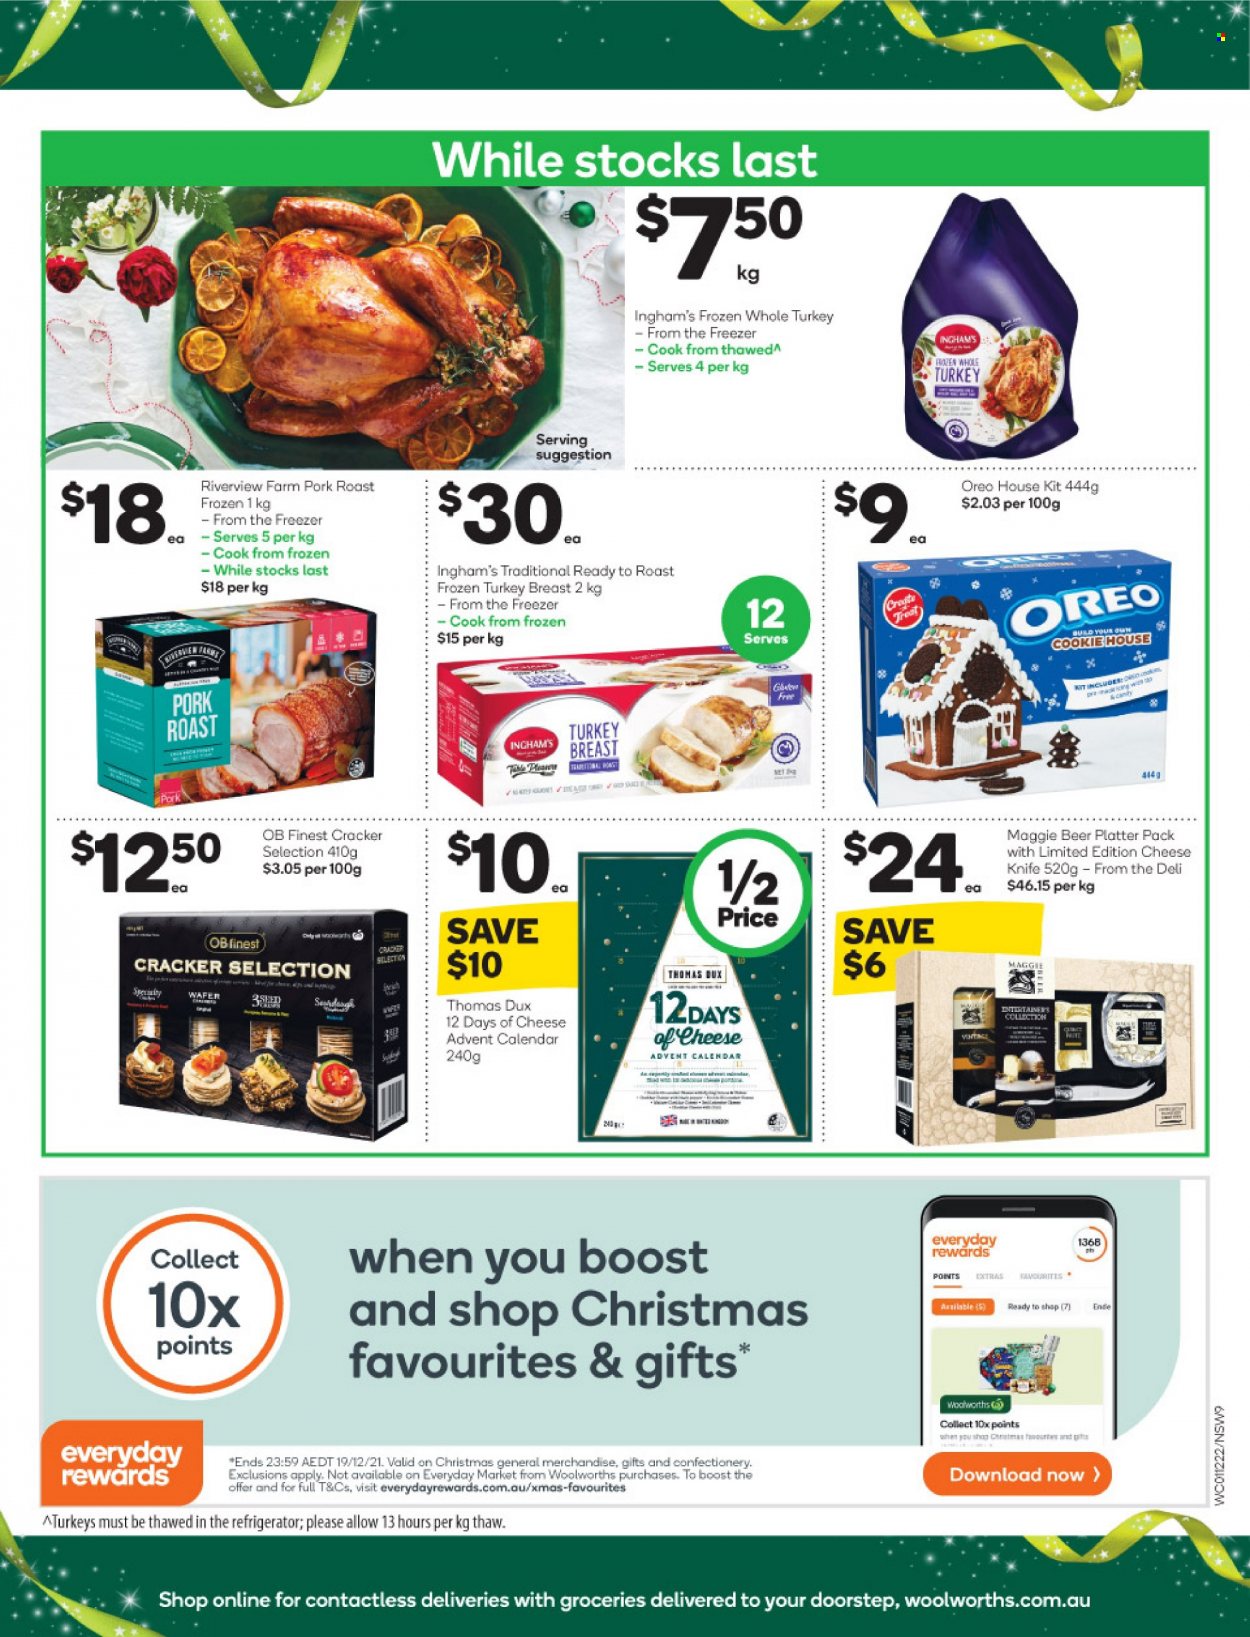 thumbnail - Woolworths Catalogue - 1 Dec 2021 - 7 Dec 2021 - Sales products - cheese, cheese advent calendar, advent calendar, Oreo, wafers, crackers, Boost, beer, whole turkey, pork meat, pork roast, knife, calendar, t-shirt. Page 9.